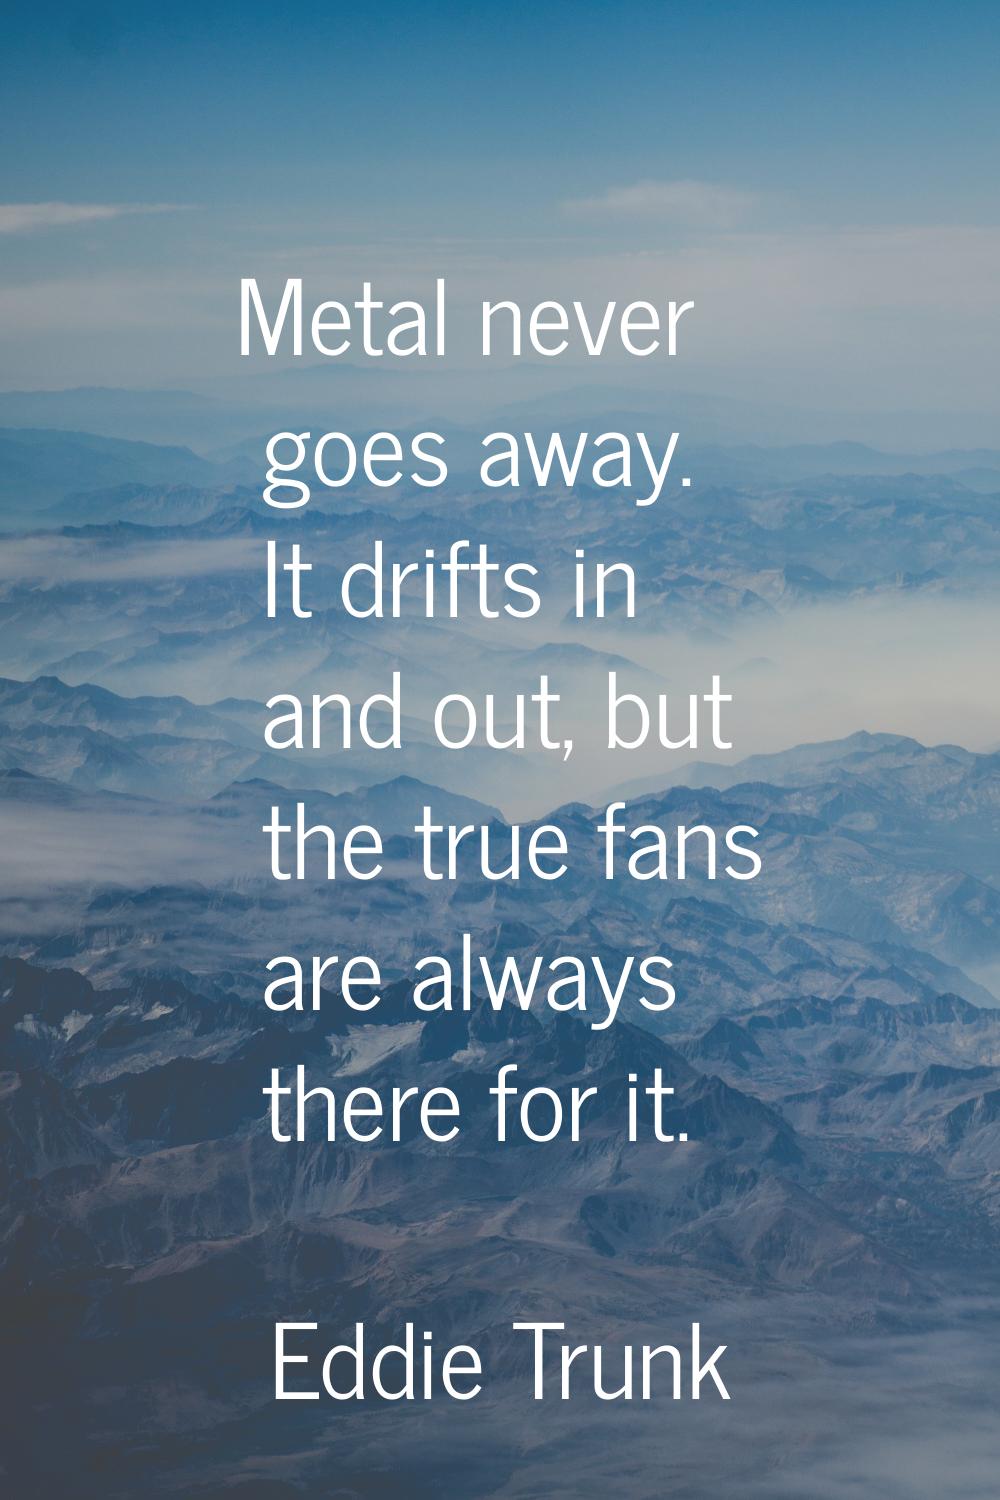 Metal never goes away. It drifts in and out, but the true fans are always there for it.